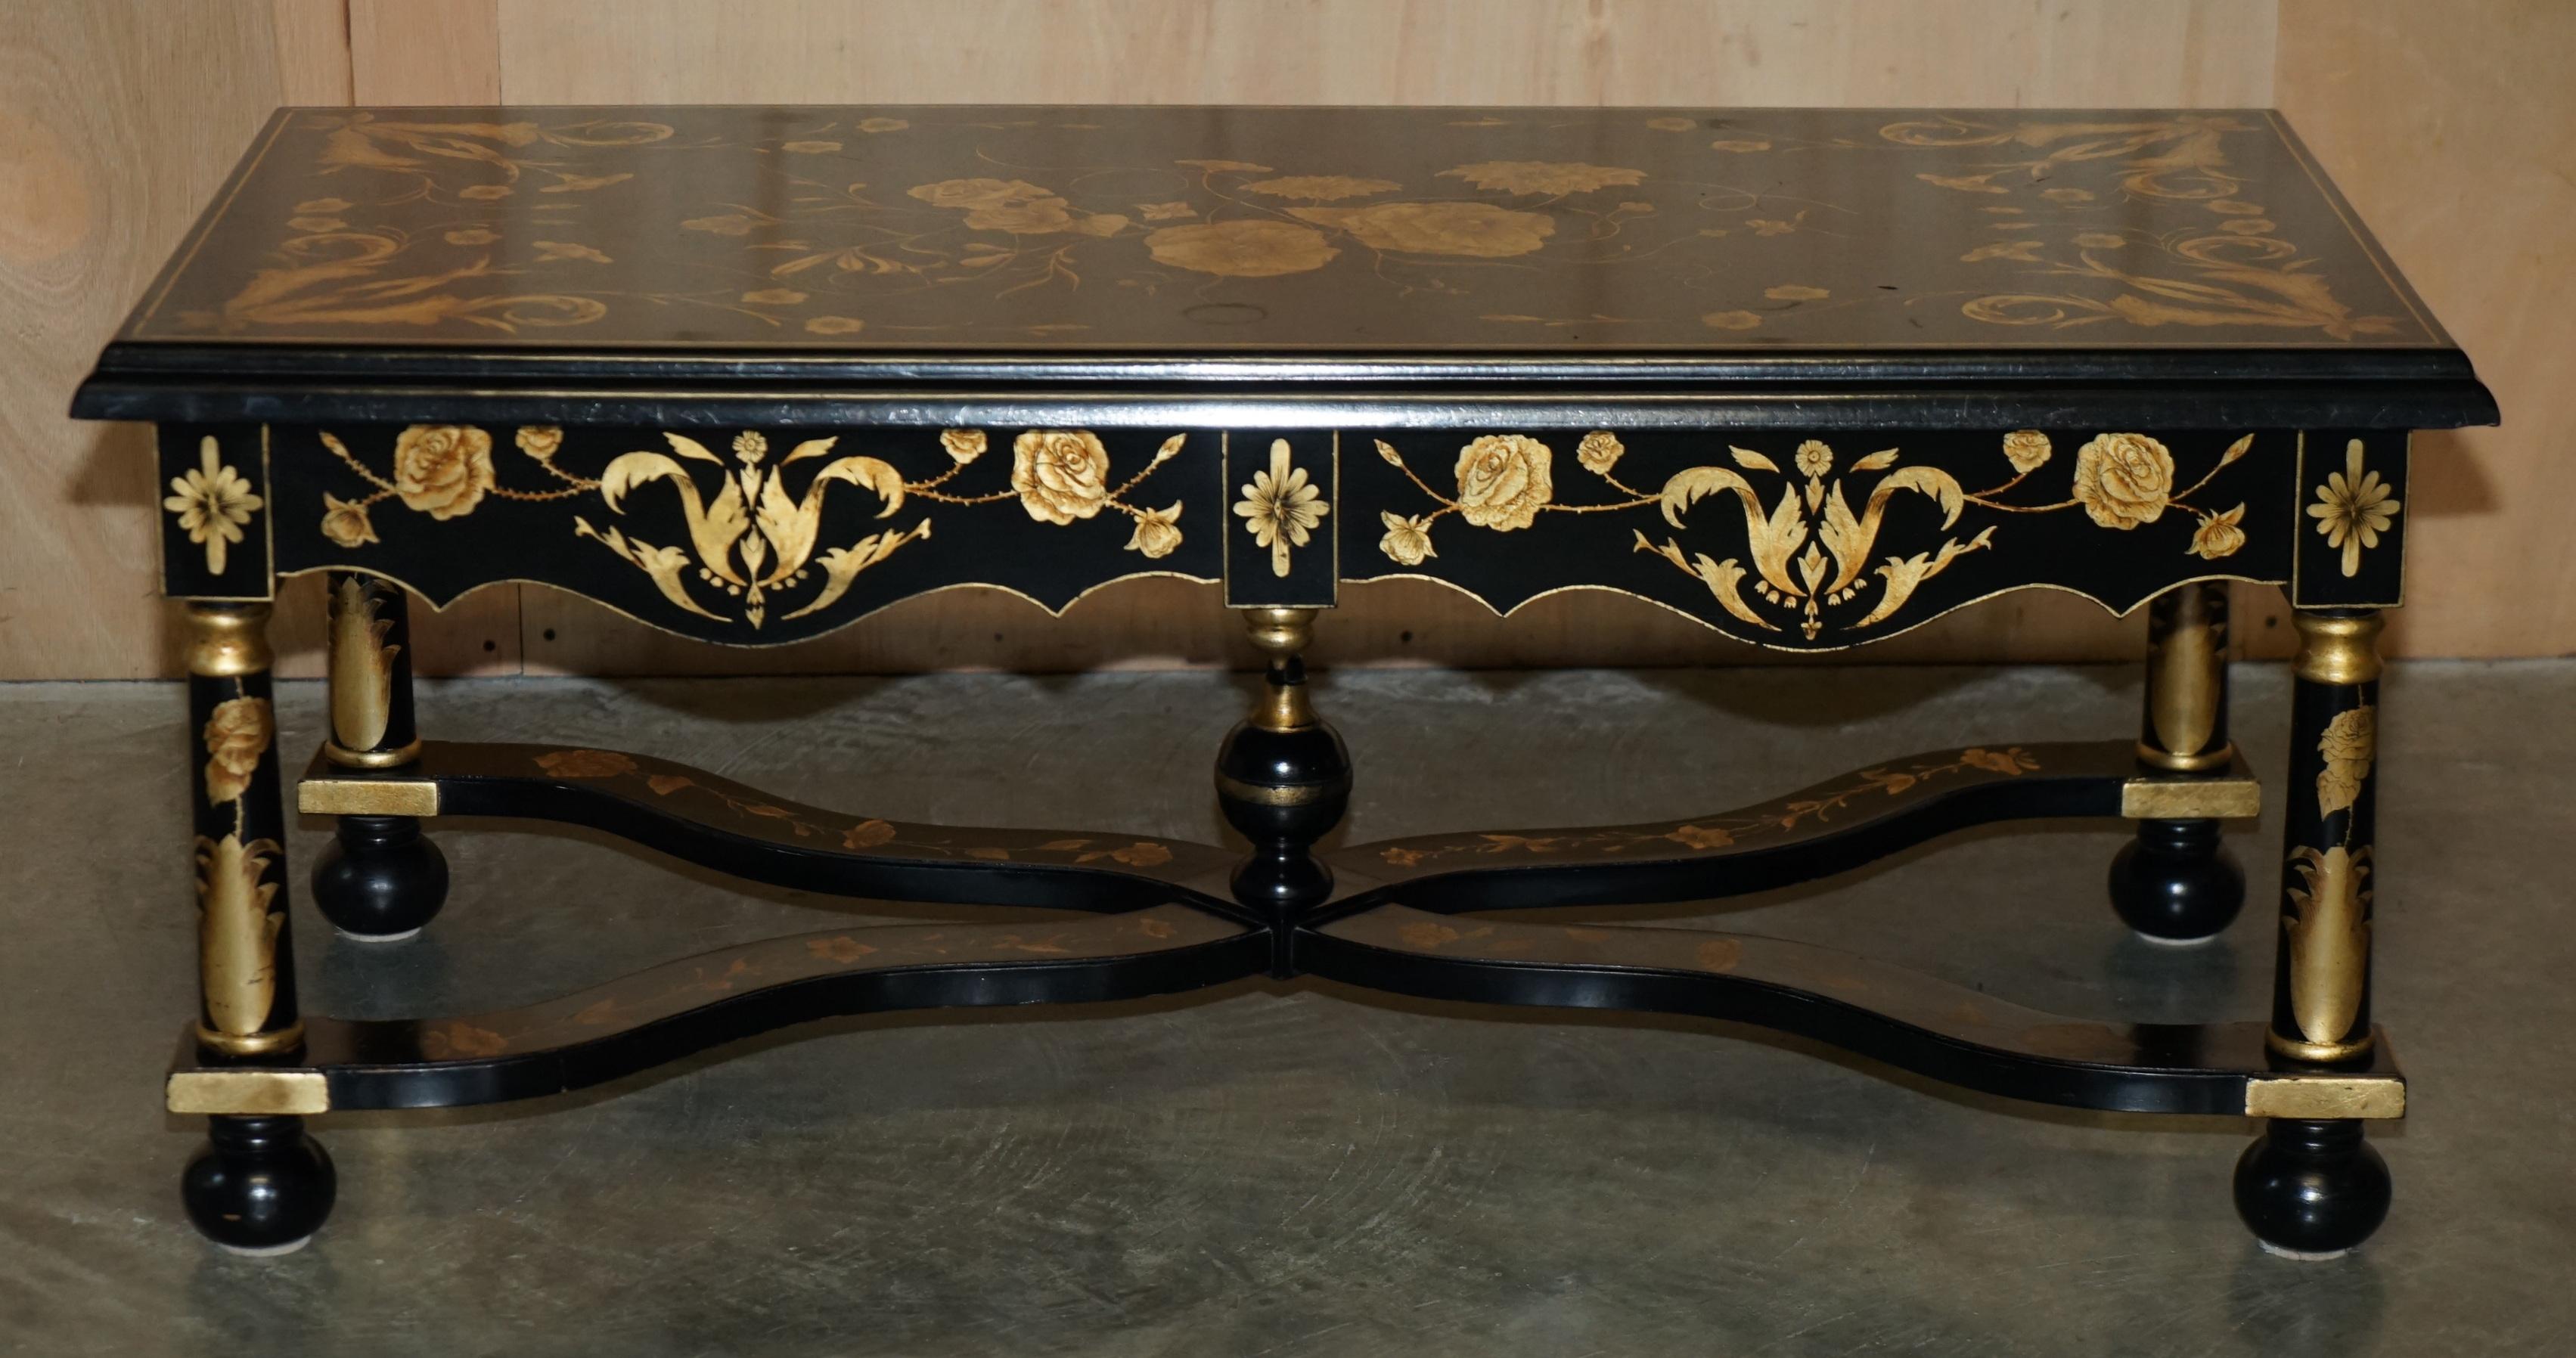 ViNTAGE HAND LACQUERED CHINESE ORIENTAL COFFEE COCKTAIL-TABLE MIT DRAWERS (Chinoiserie) im Angebot